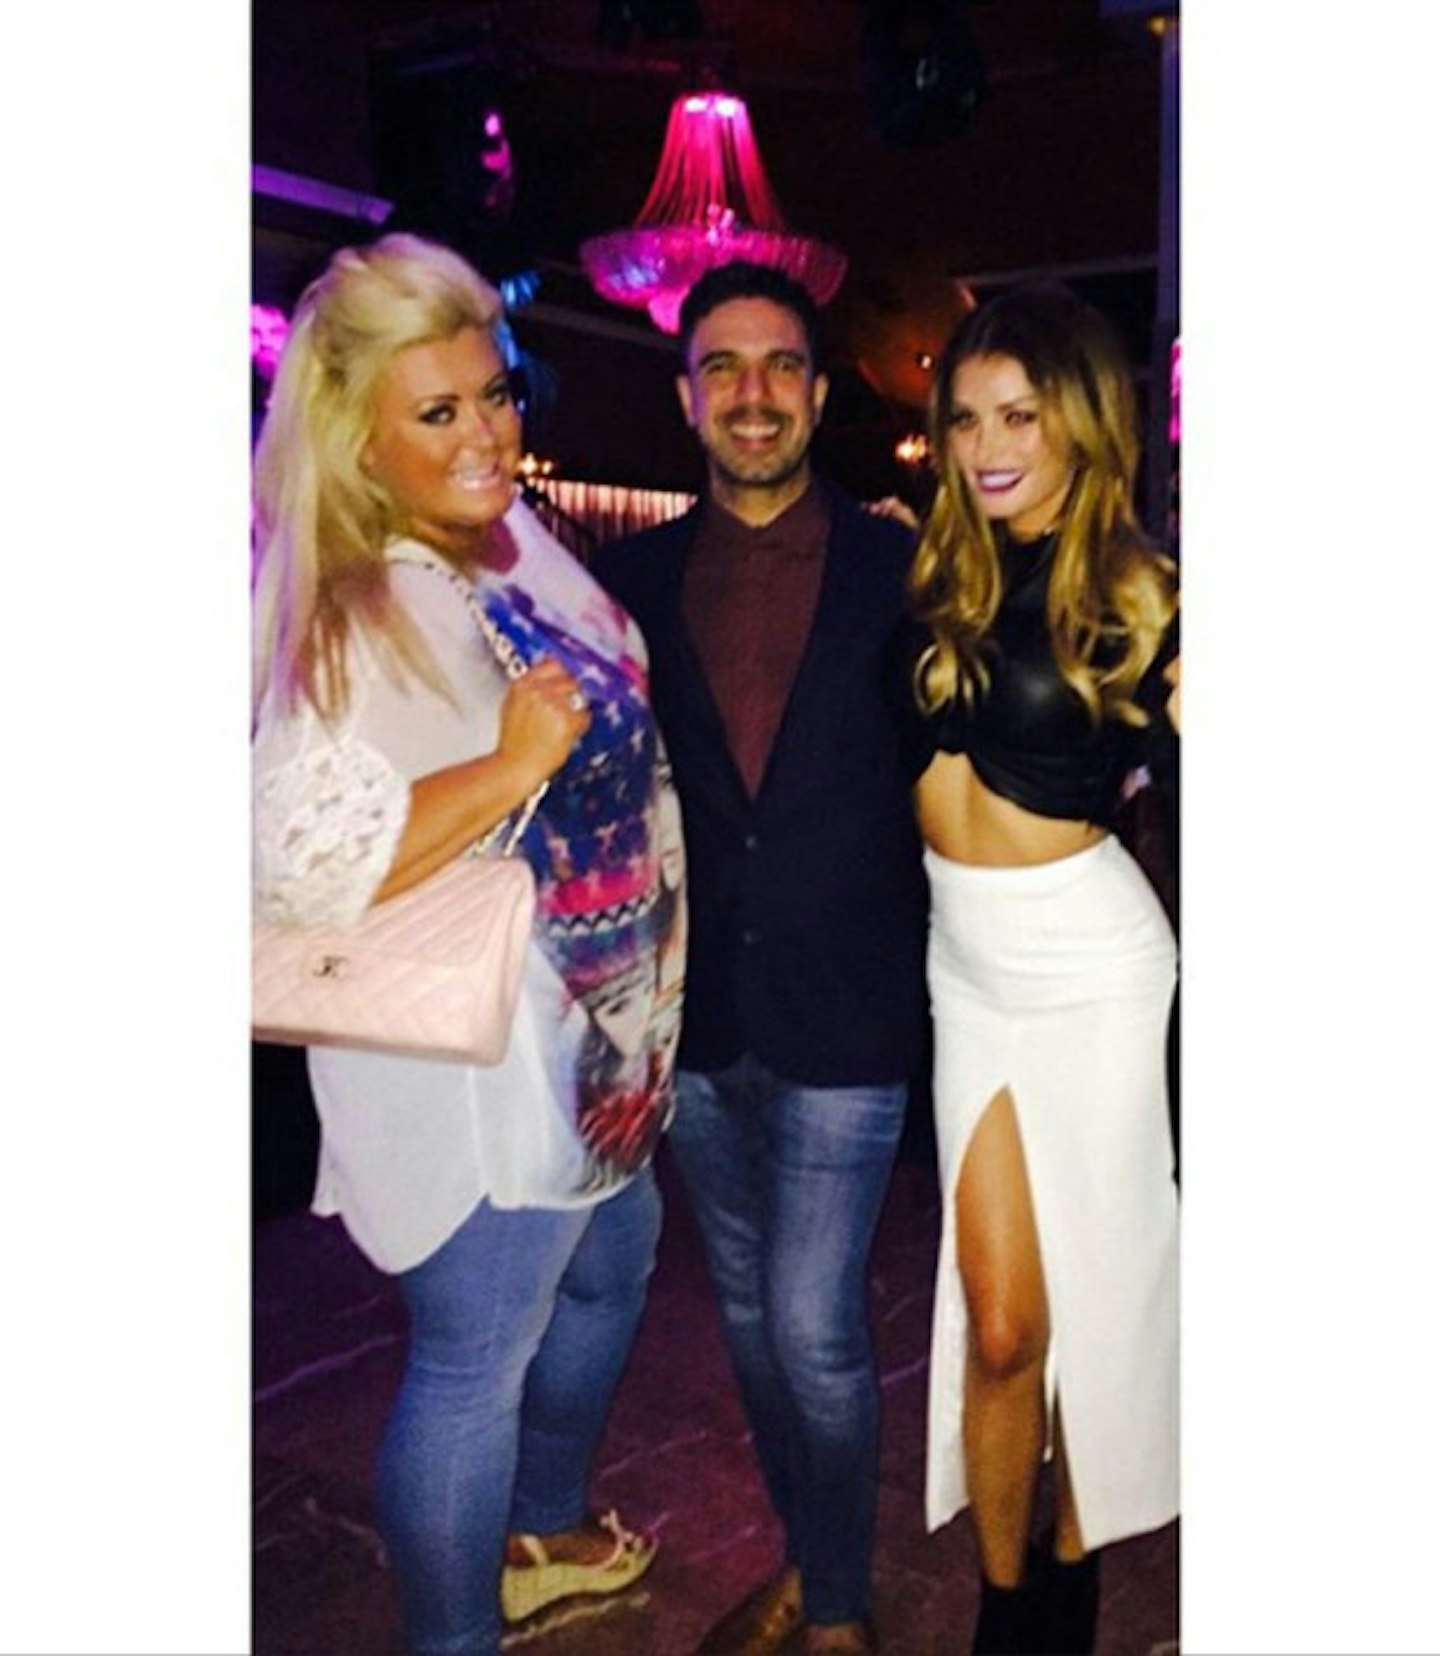 Gemma Collins, Chloe Sims and some guy